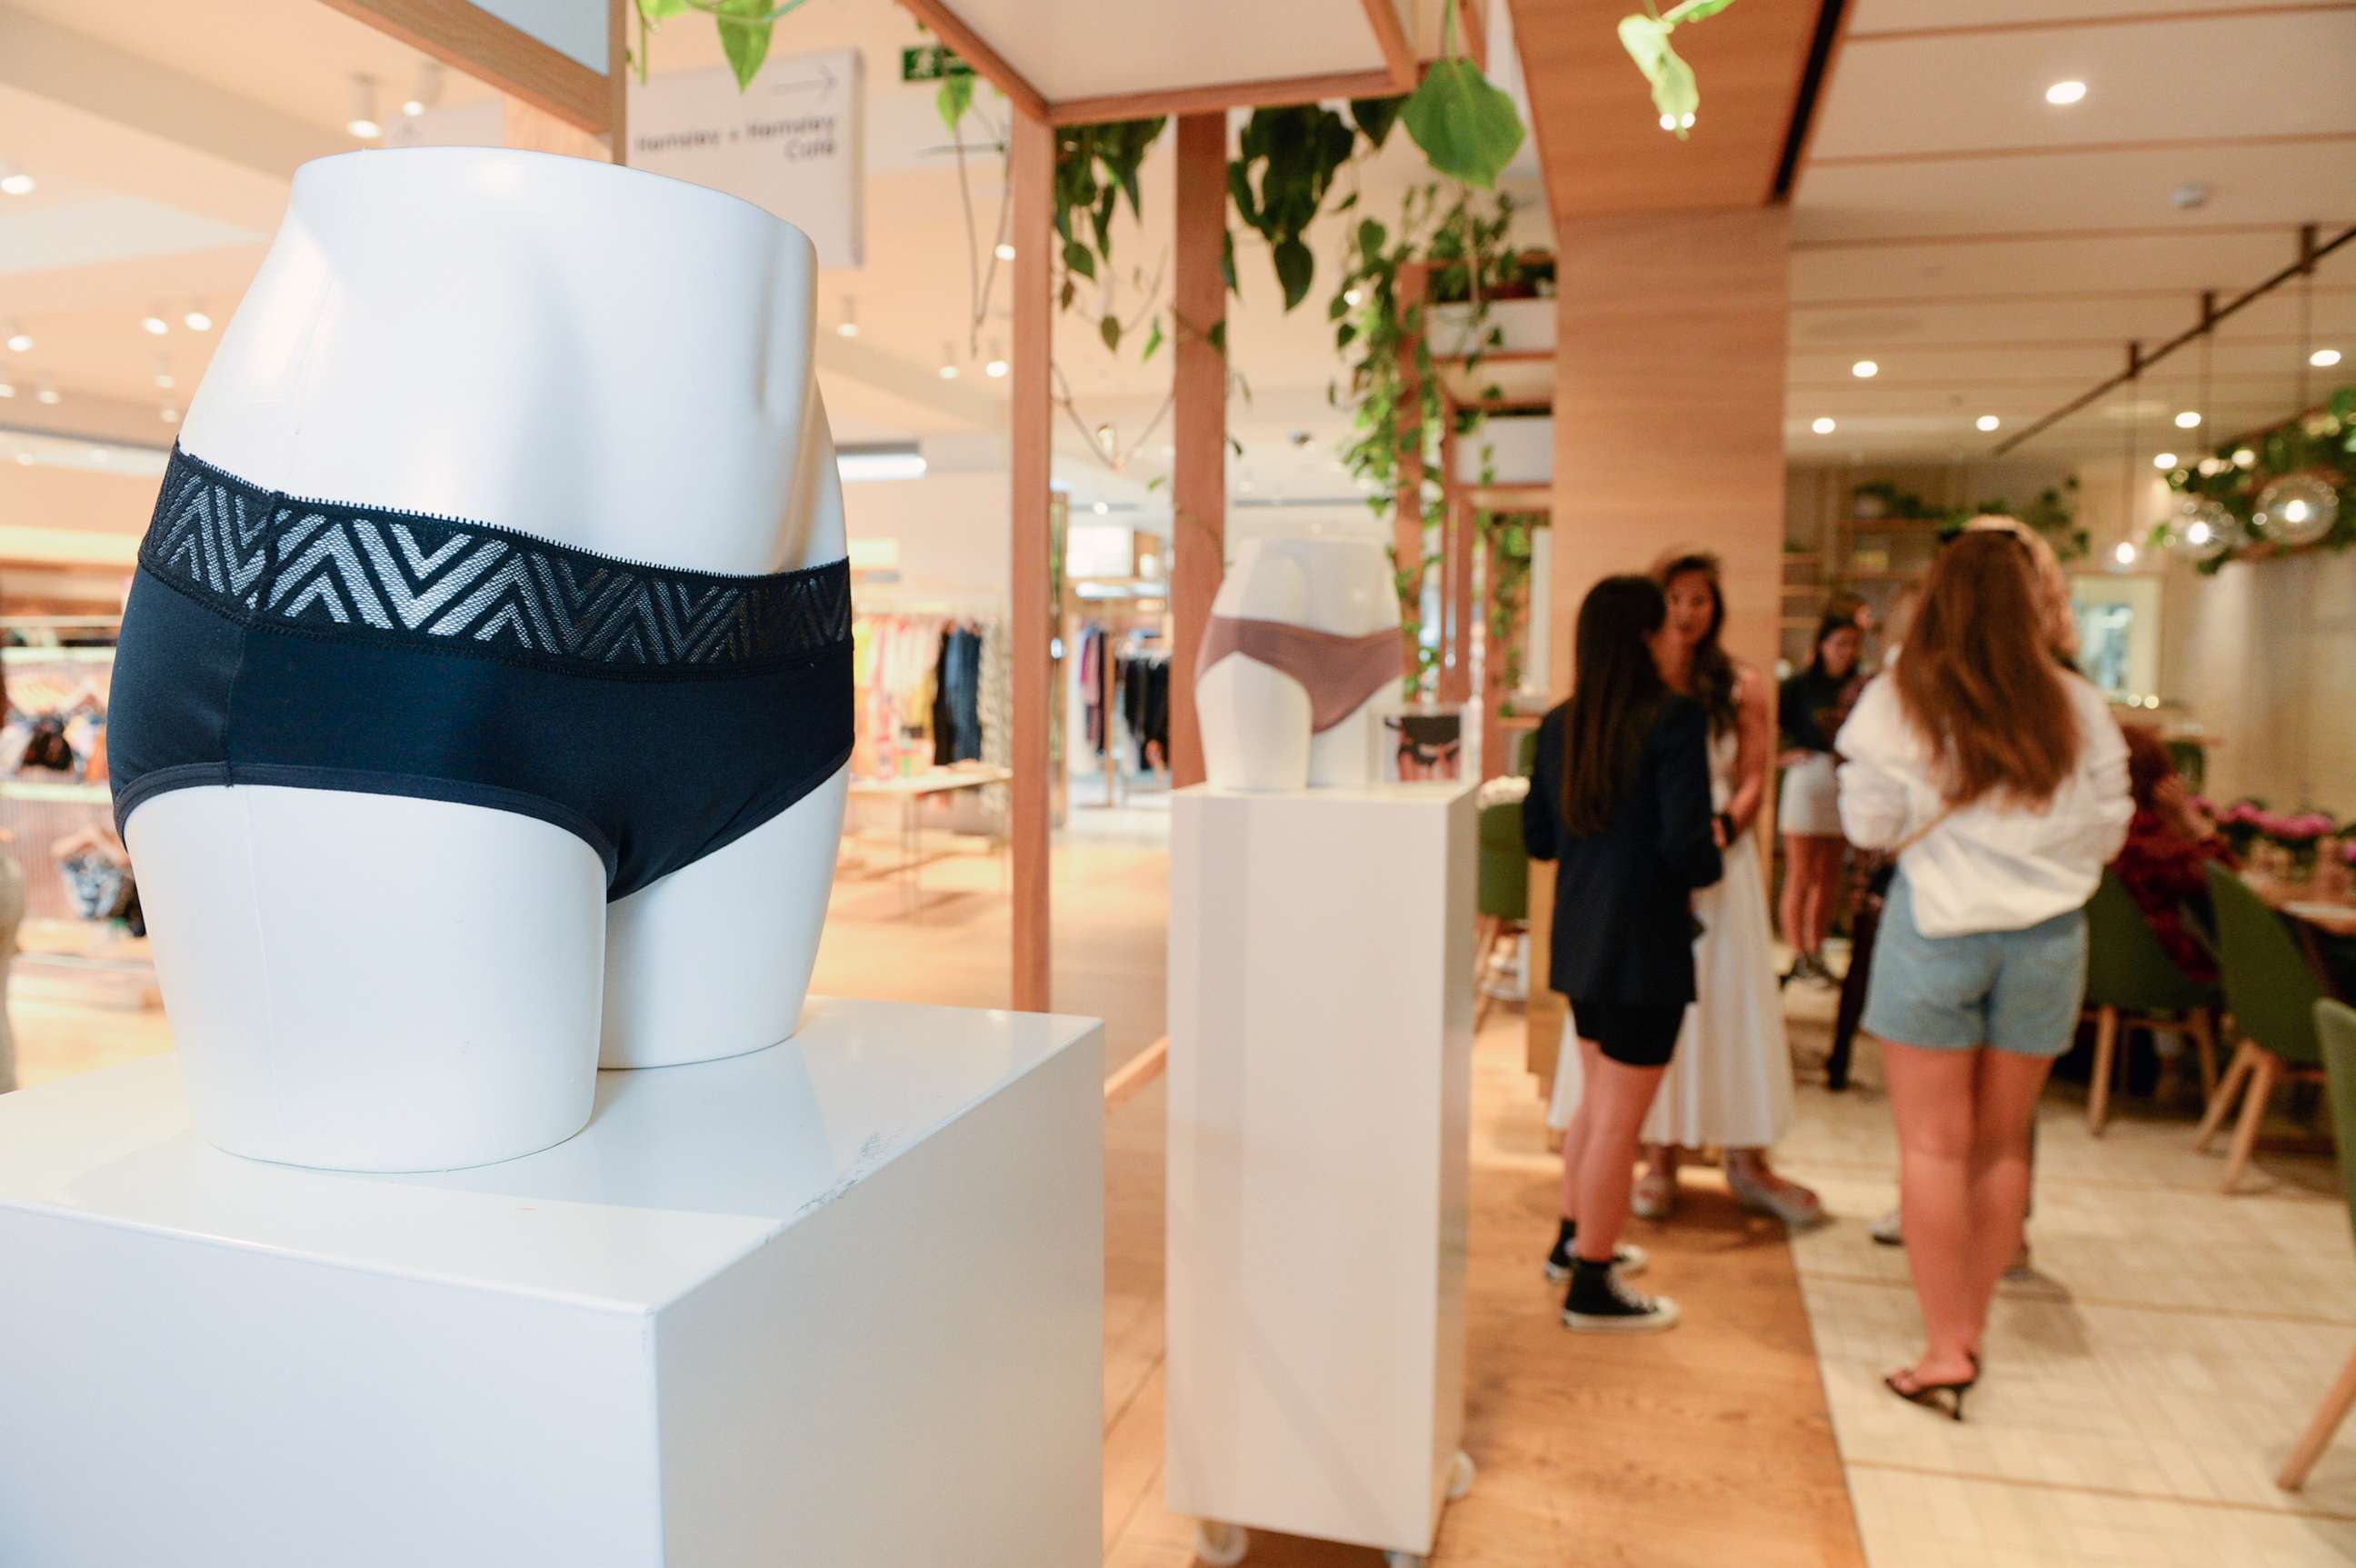 PHOTO: NY-Based period-proof underwear company Thinx debuts conceptual window featuring periods at Selfridges on July 4, 2019 in London.